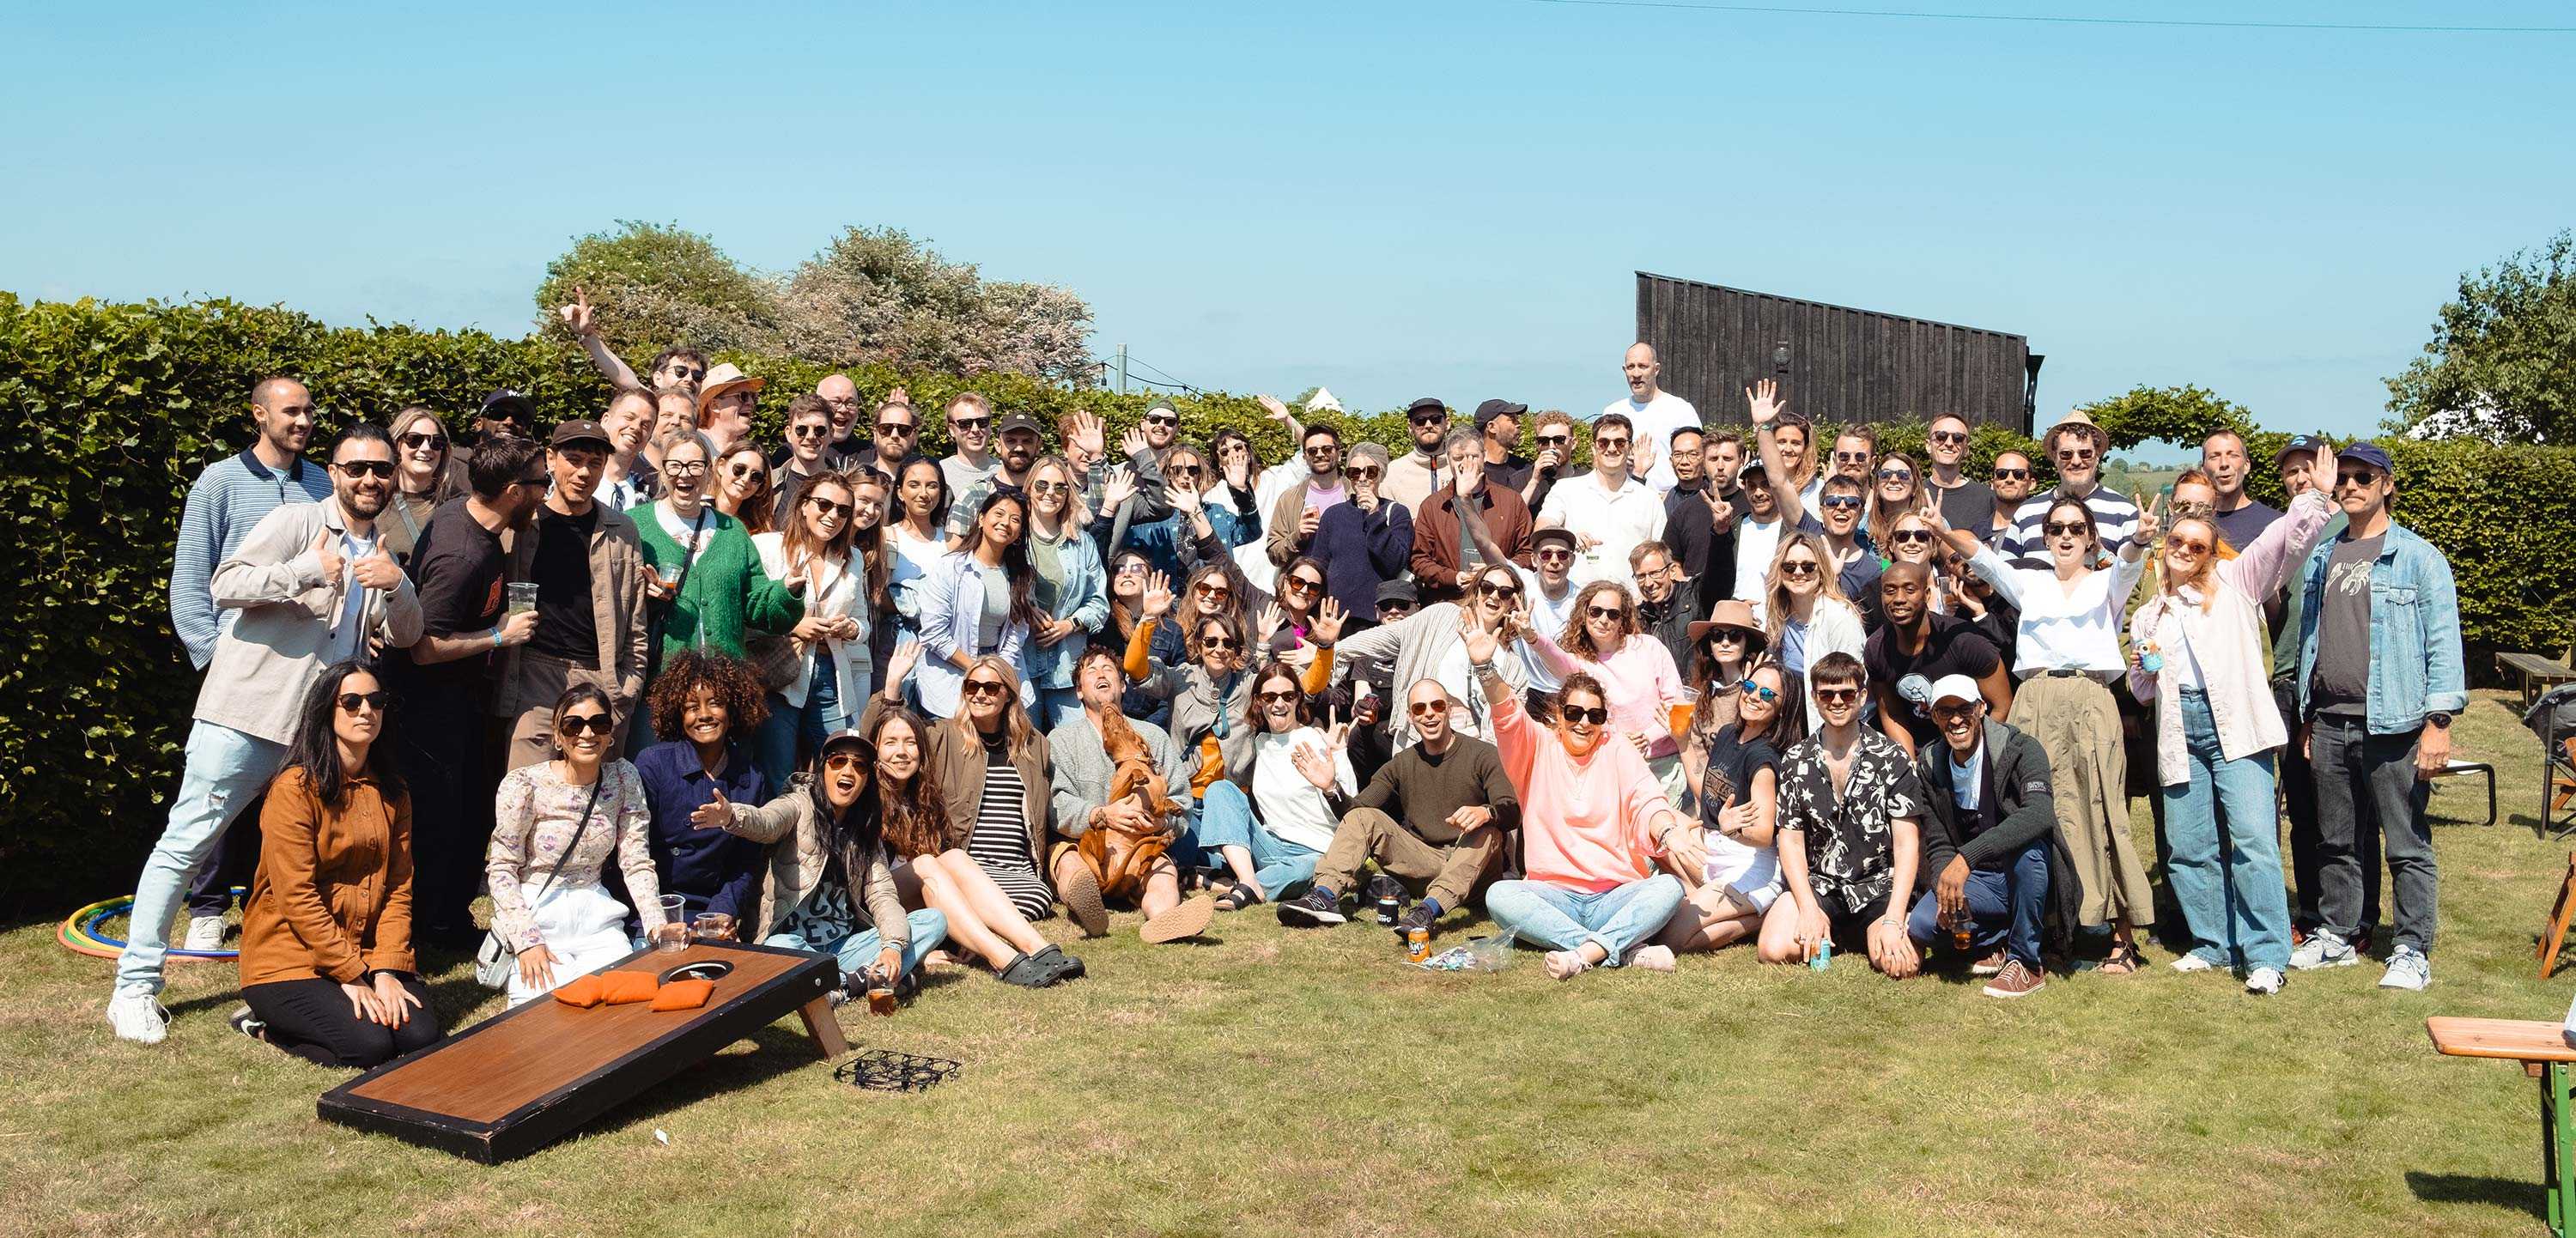 A group shot of employees at our annual social day - smiling, waving and cheering against a bucolic scene of green grass and blue sky